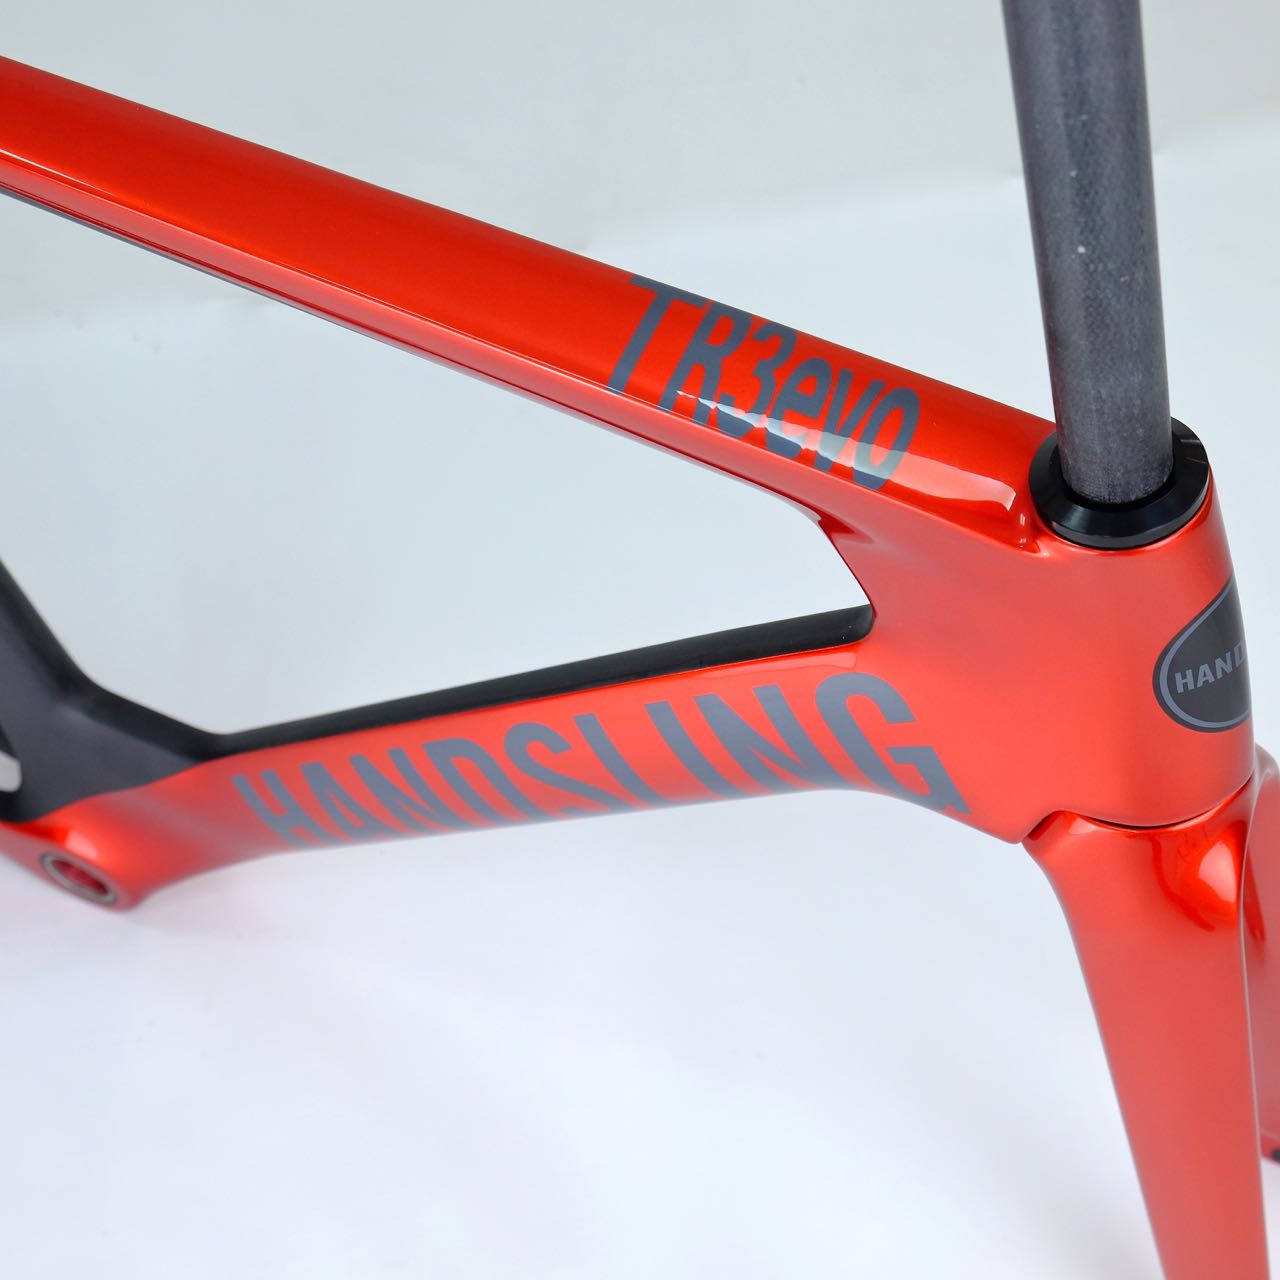 Cuadro Handsling TR3evo Track - Candy Red